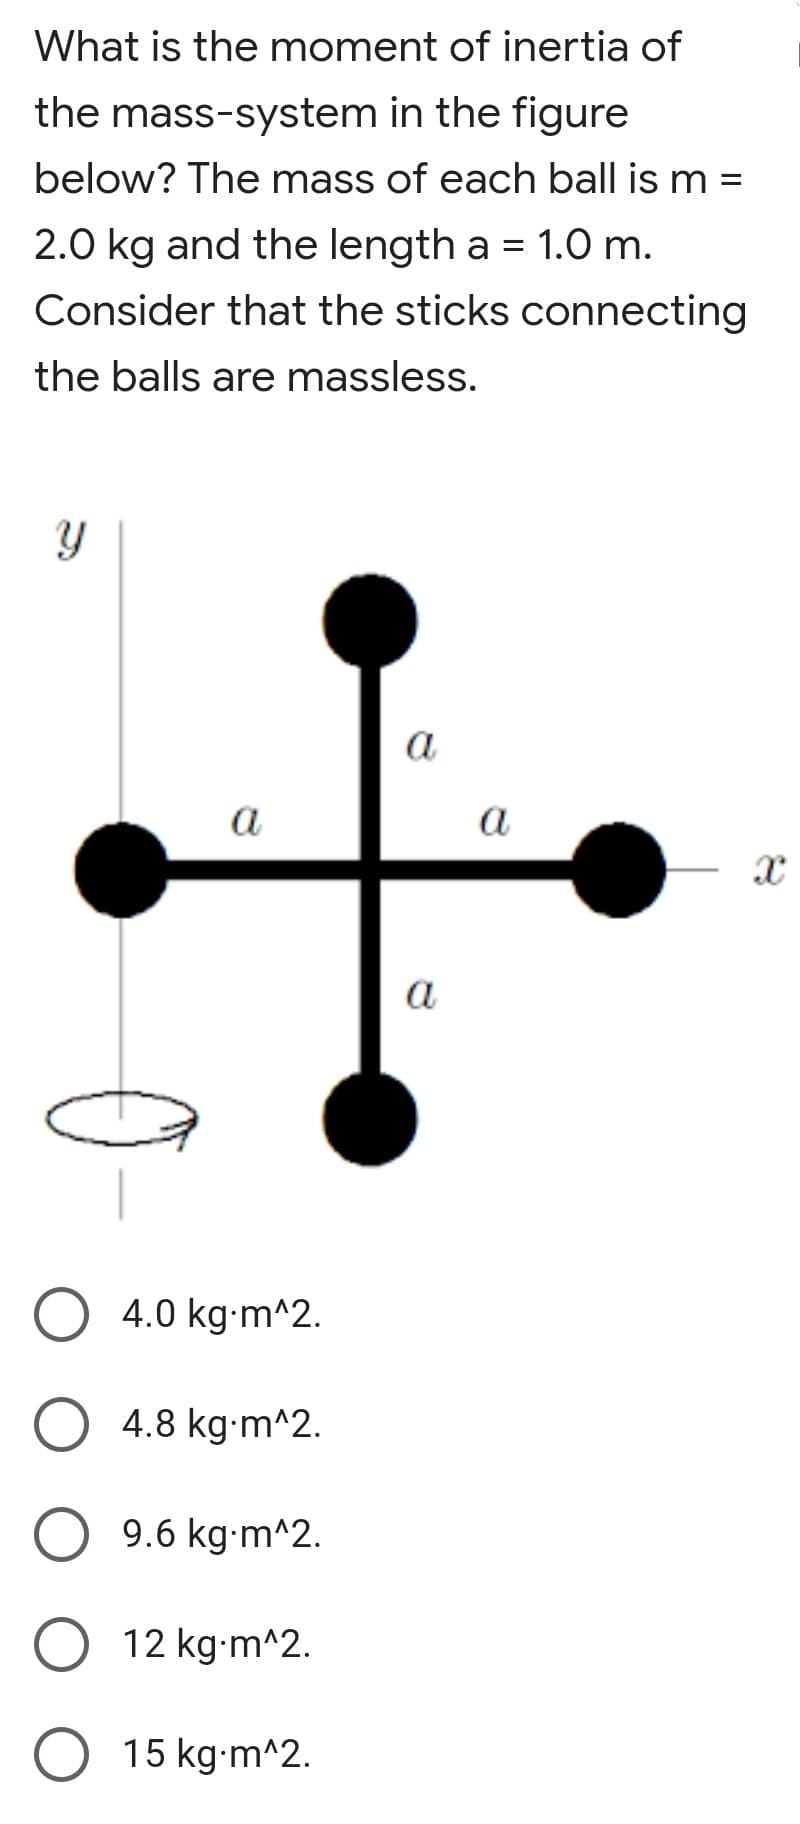 What is the moment of inertia of
the mass-system in the figure
below? The mass of each ball is m =
2.0 kg and the length a = 1.0 m.
Consider that the sticks connecting
the balls are massless.
a
a
a
a
4.0 kg-m^2.
4.8 kg-m^2.
9.6 kg-m^2.
12 kg-m^2.
15 kg-m^2.
